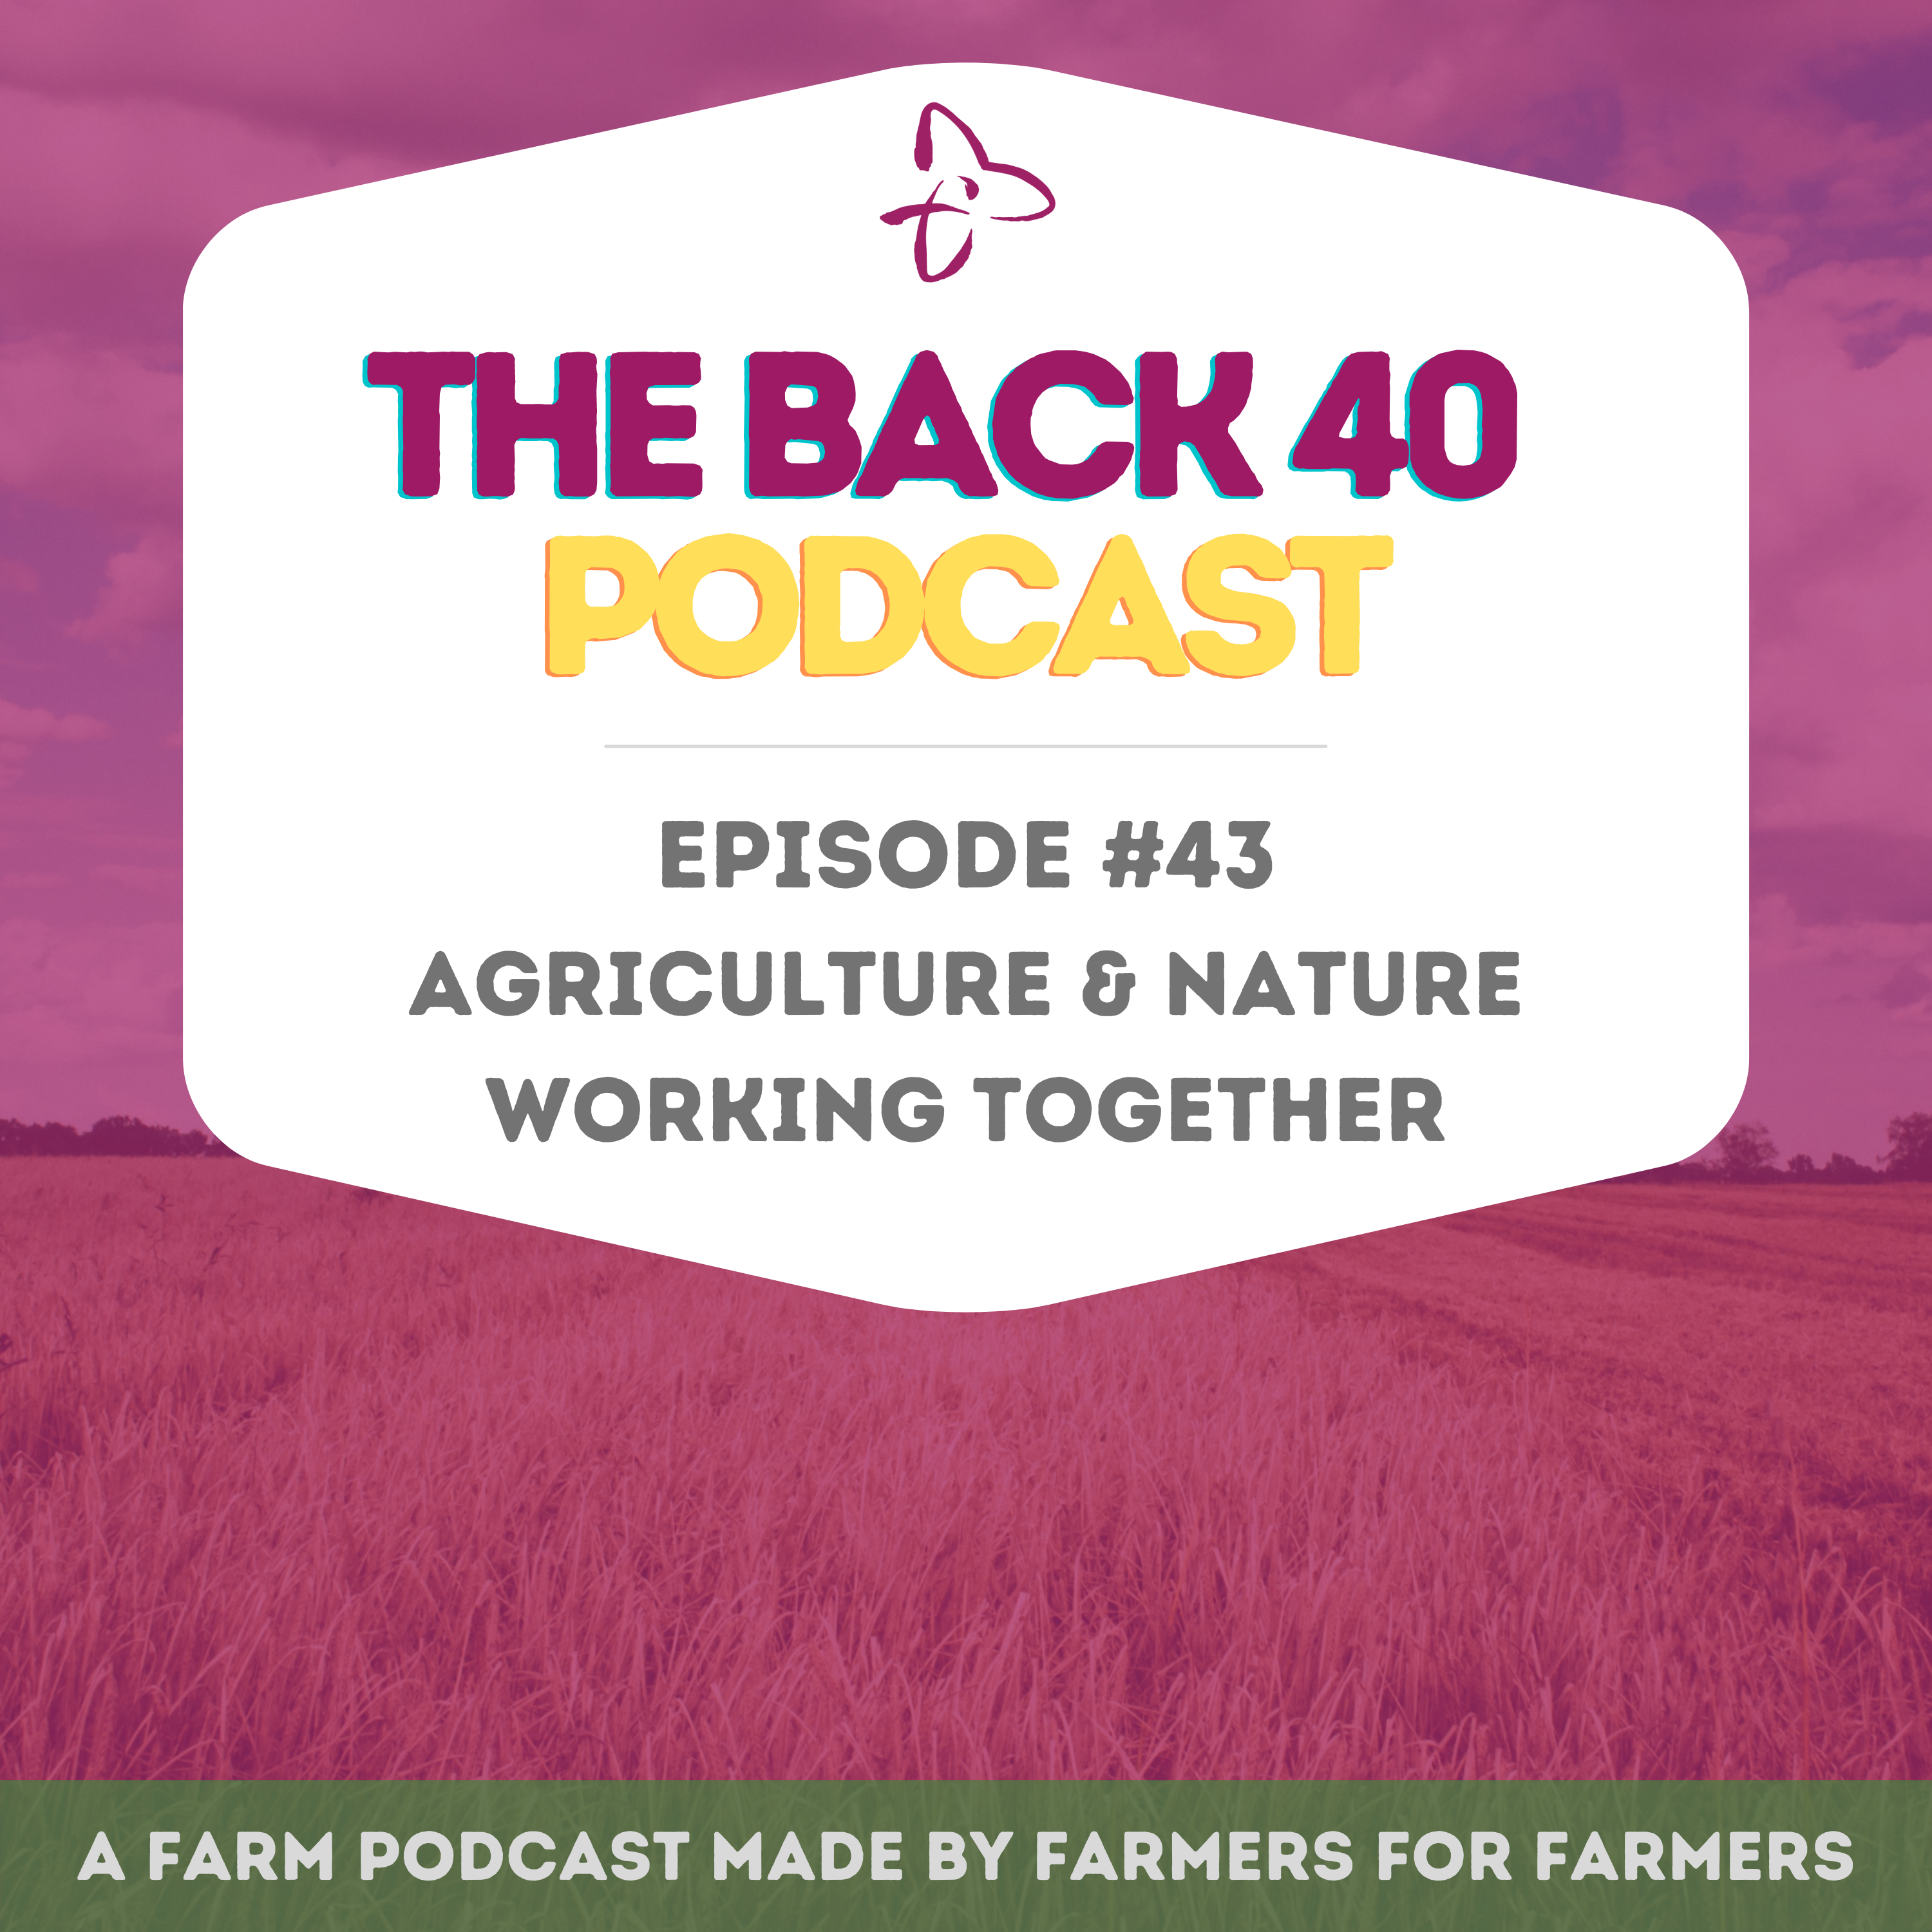 Agriculture & Nature Working Together